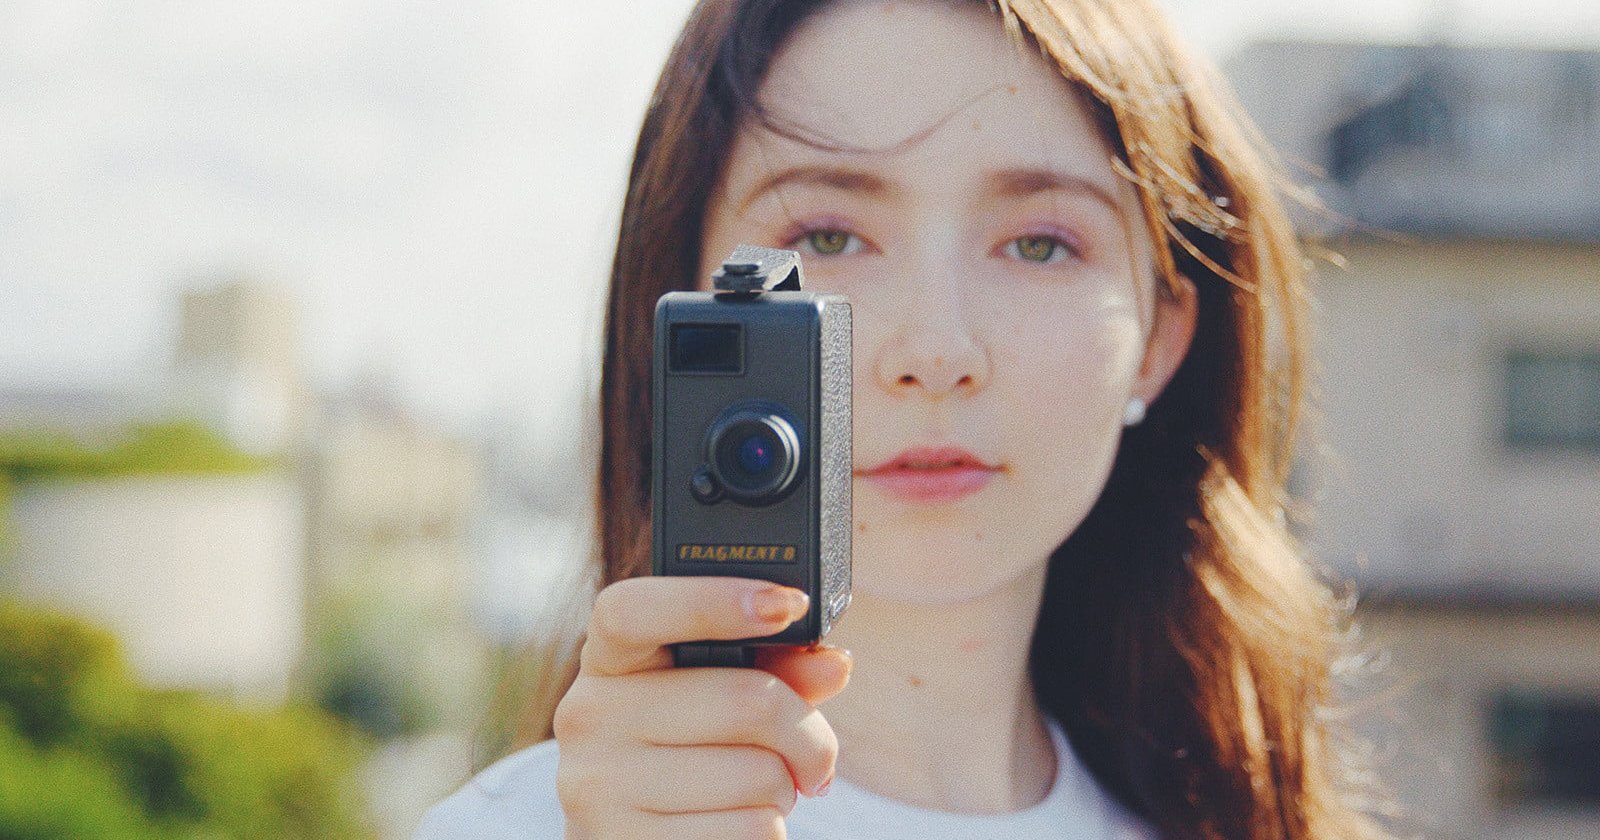 This Super 8-Inspired Camera Shoots GIFs to Recreate the Look and Feel of 8mm Film